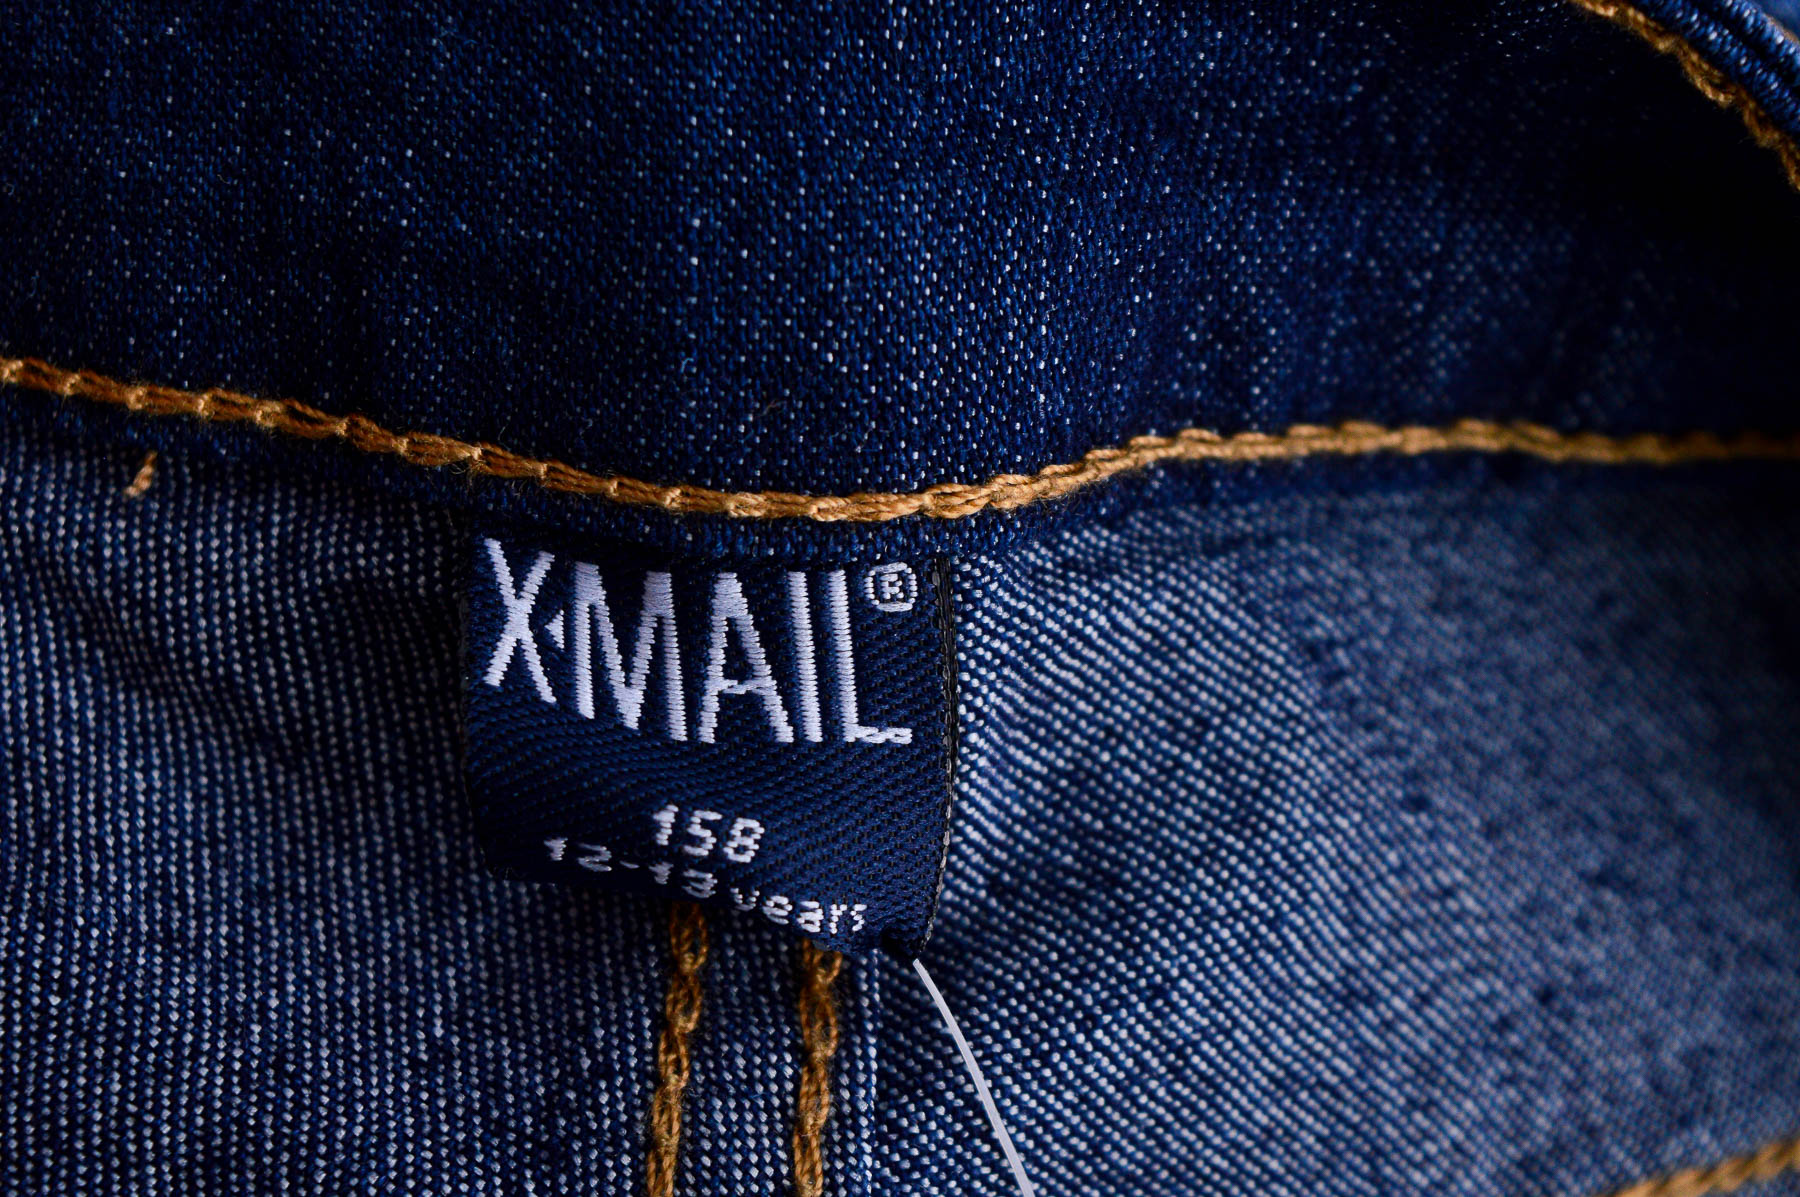 Girl's jeans - X-Mail - 2